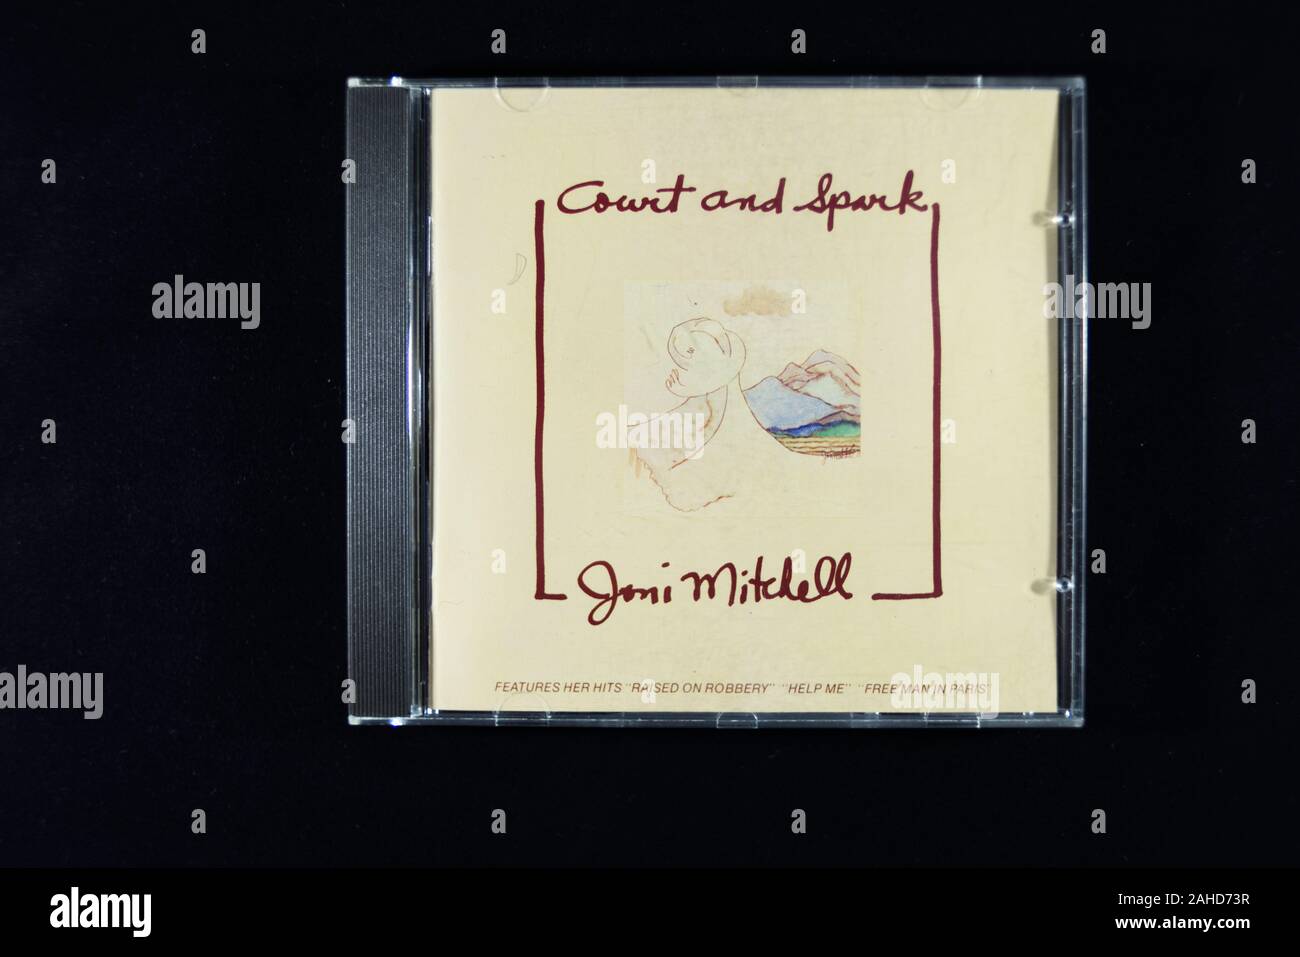 Rare Target CD'S From the 1980's Music Era. Joni Mitchell, Court and Spark. Stock Photo